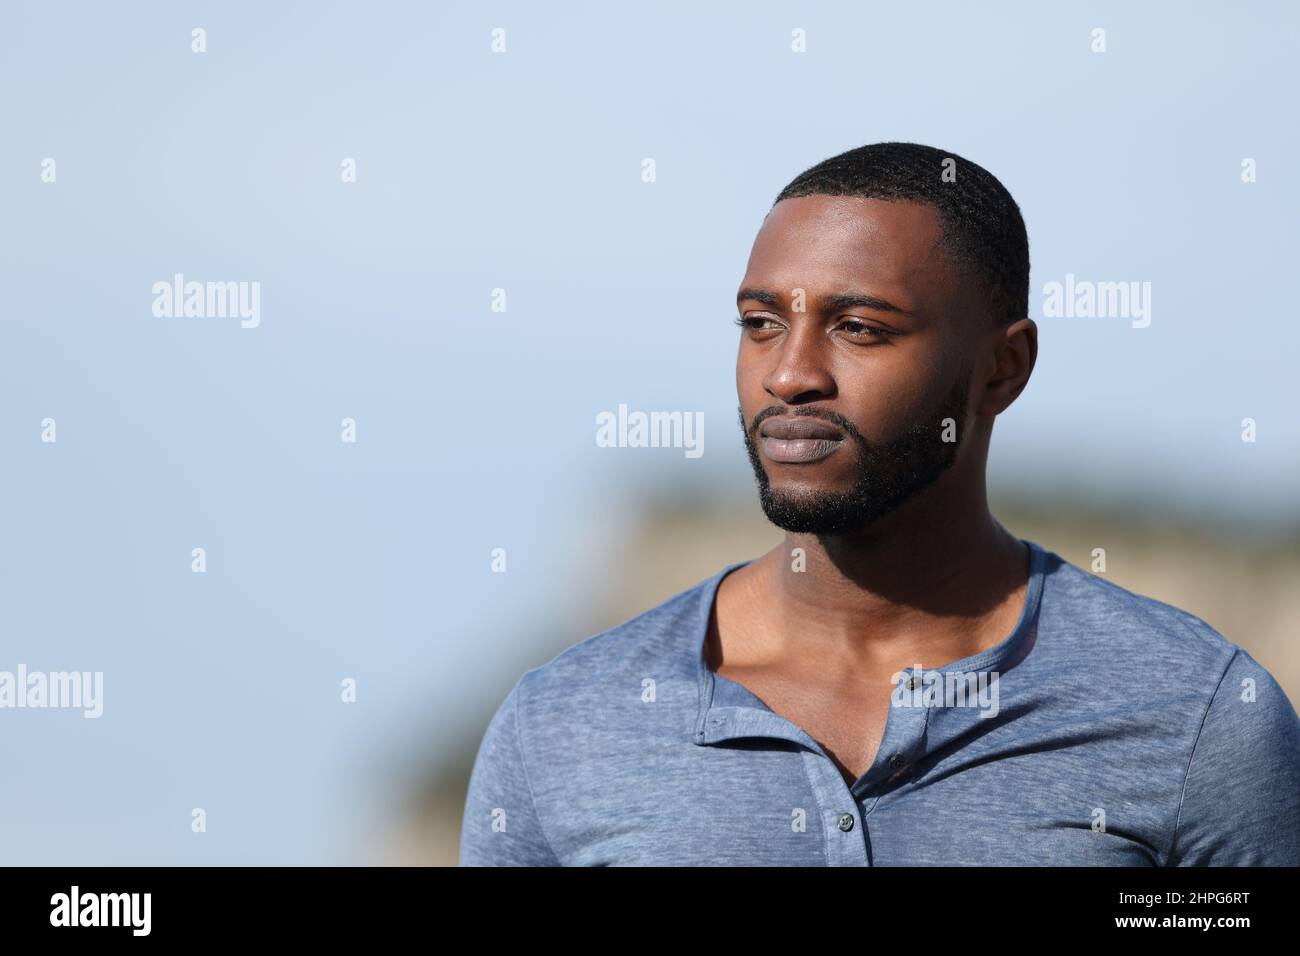 Serious man with black skin contemplating views outdoors Stock Photo